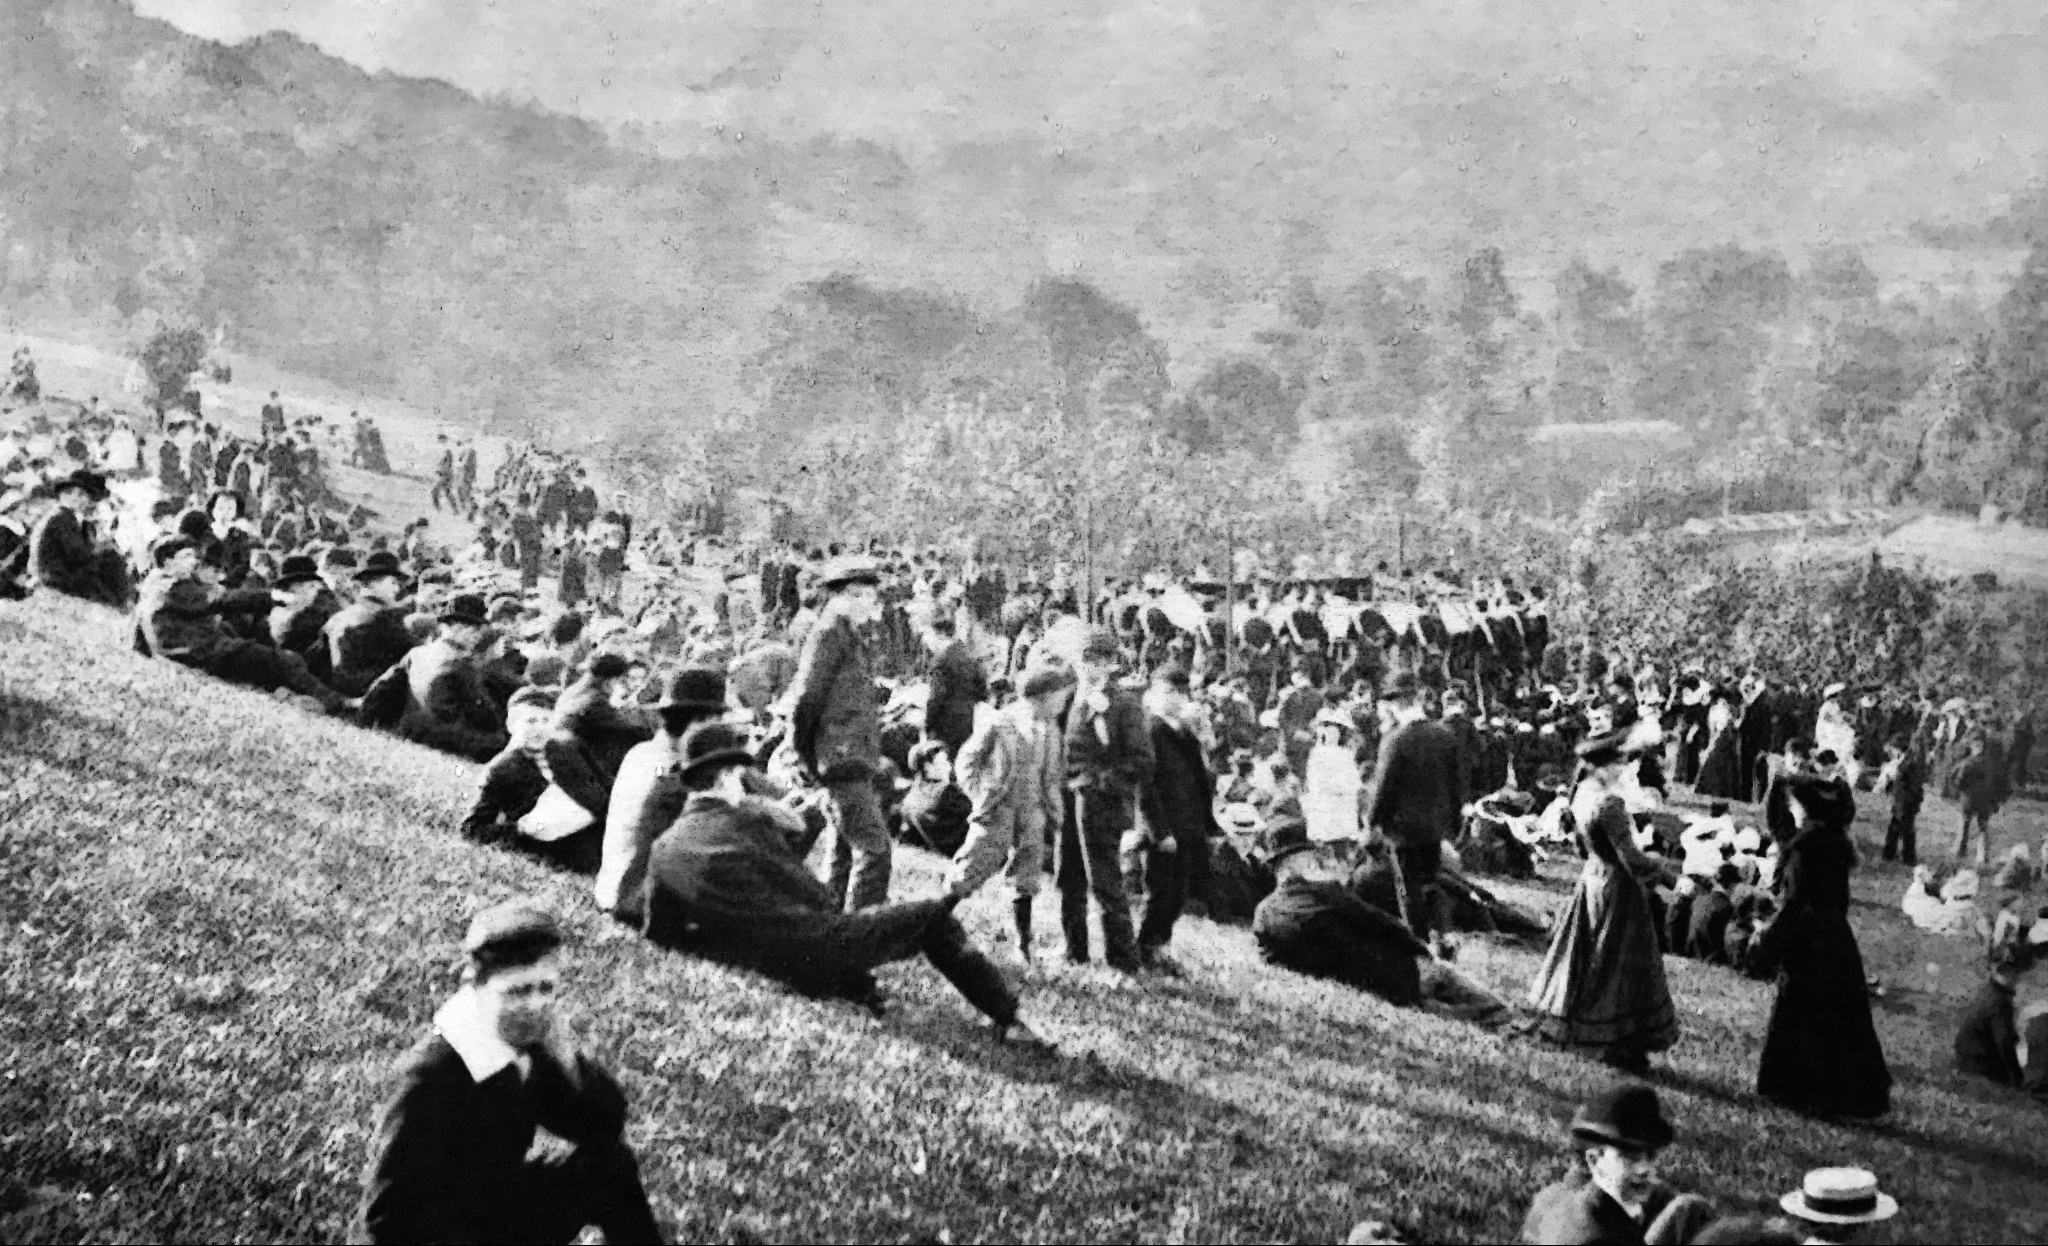 Woodhouse Ridge, with Bandstand and Visitors, early 1900s